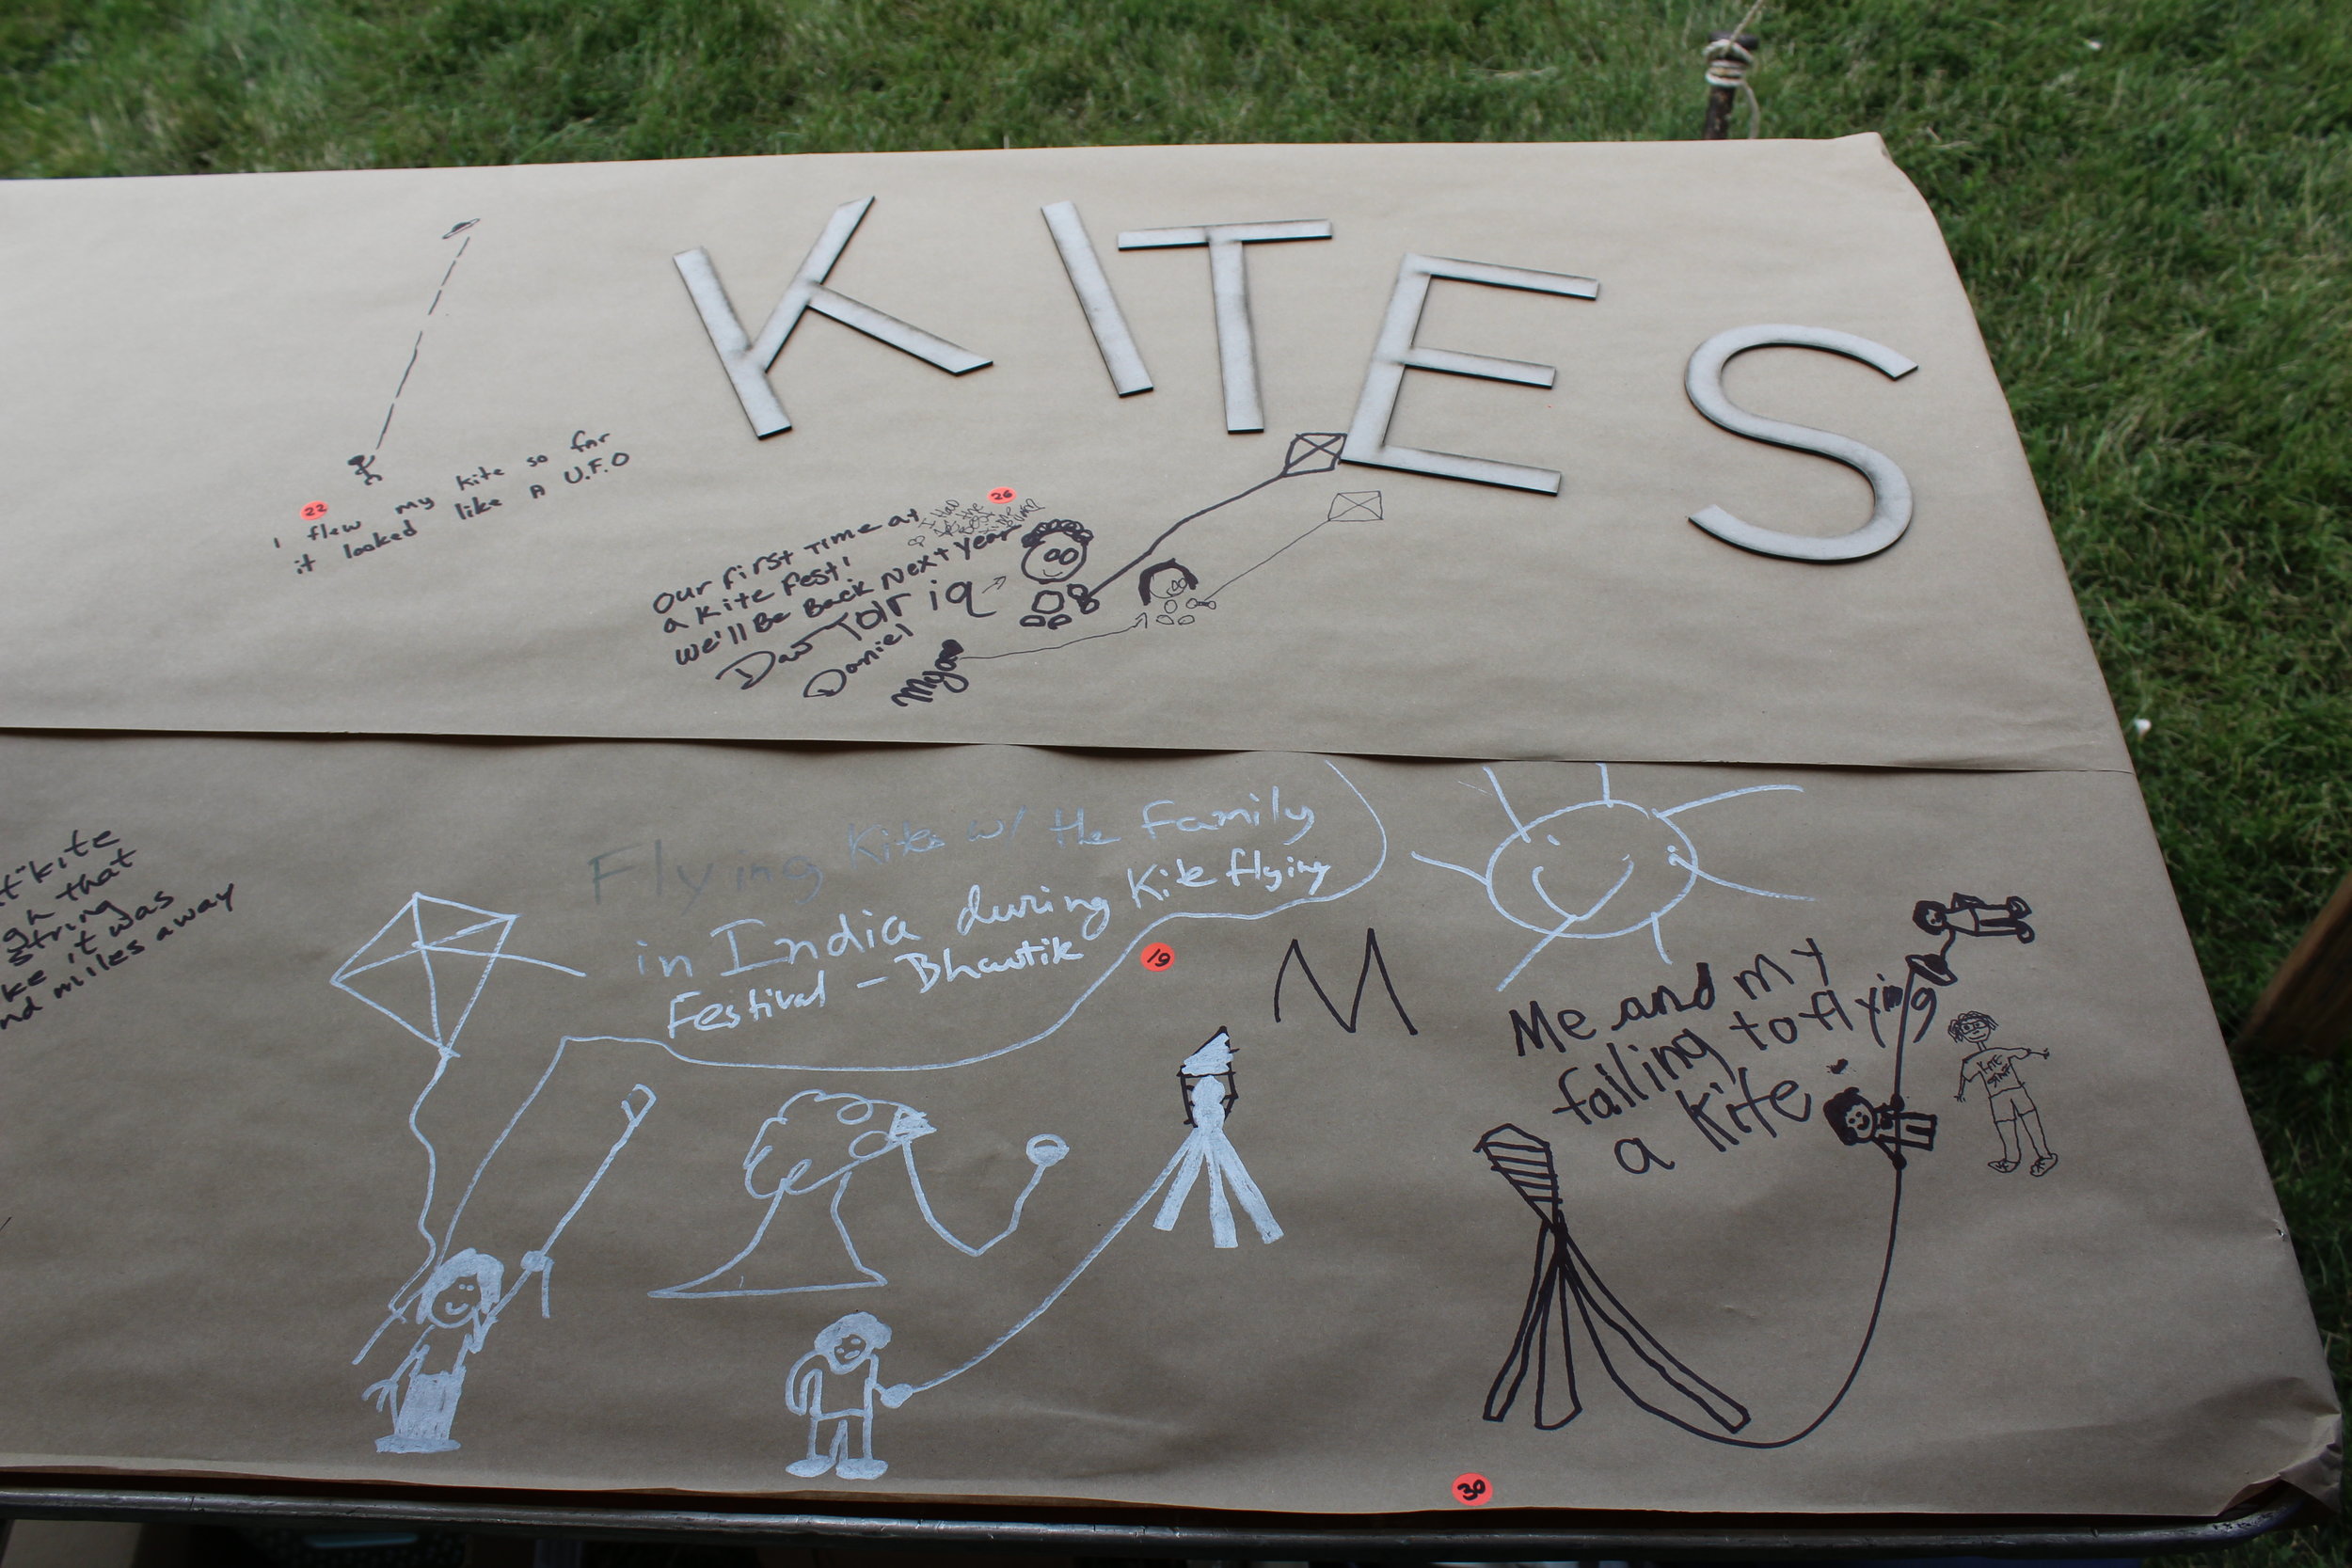  The Kite Tales display included excerpts from interviews with local kite enthusiasts. 